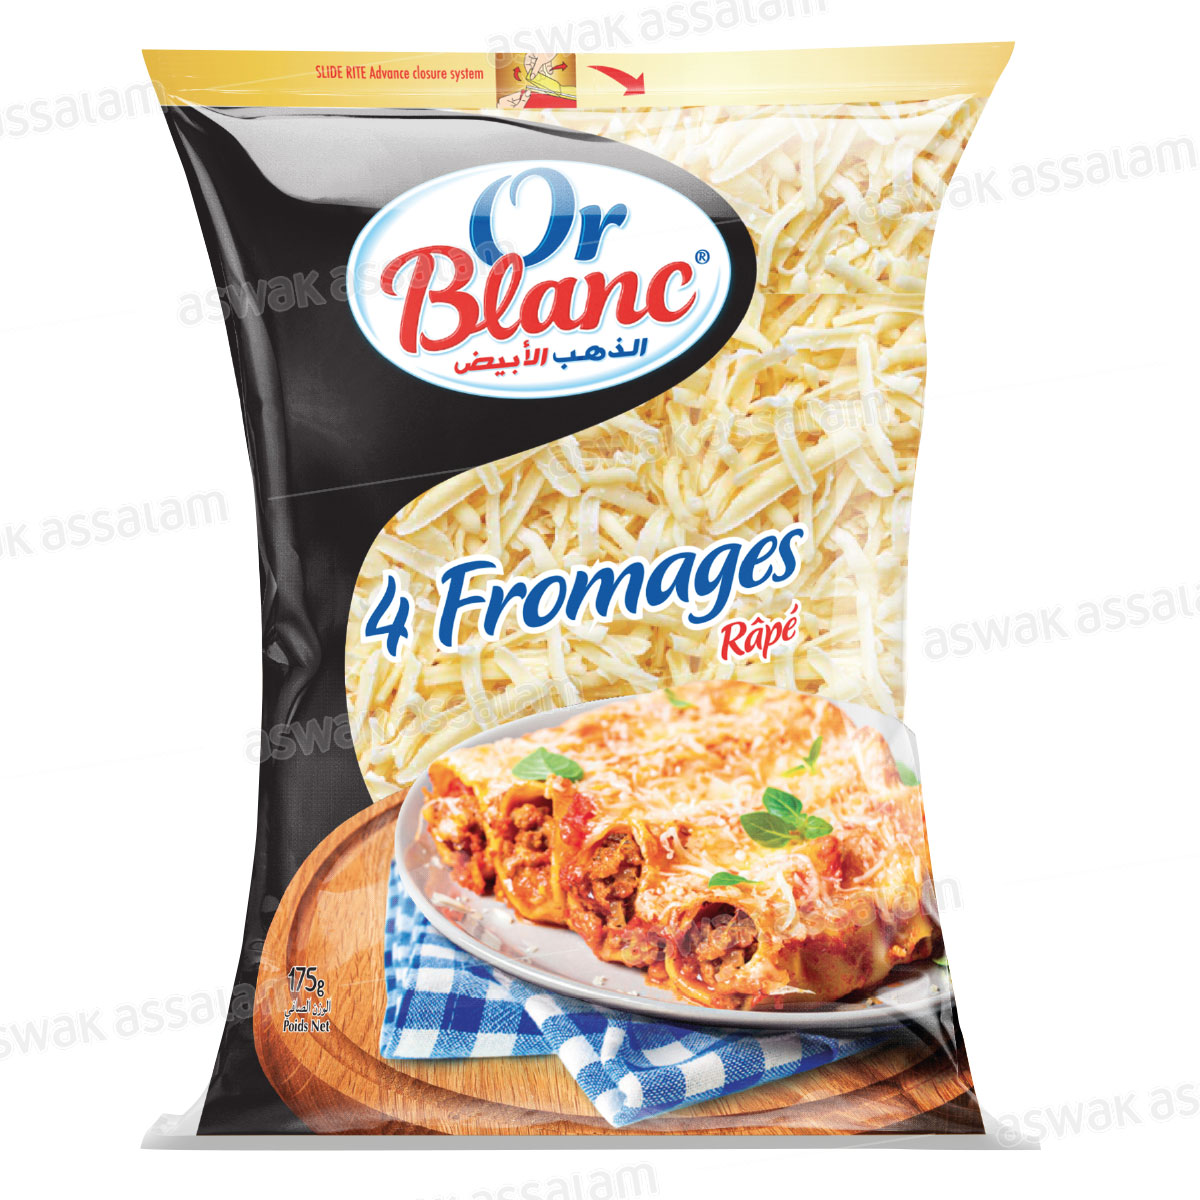 4 FROMAGES RAPES 175G OR BLANC